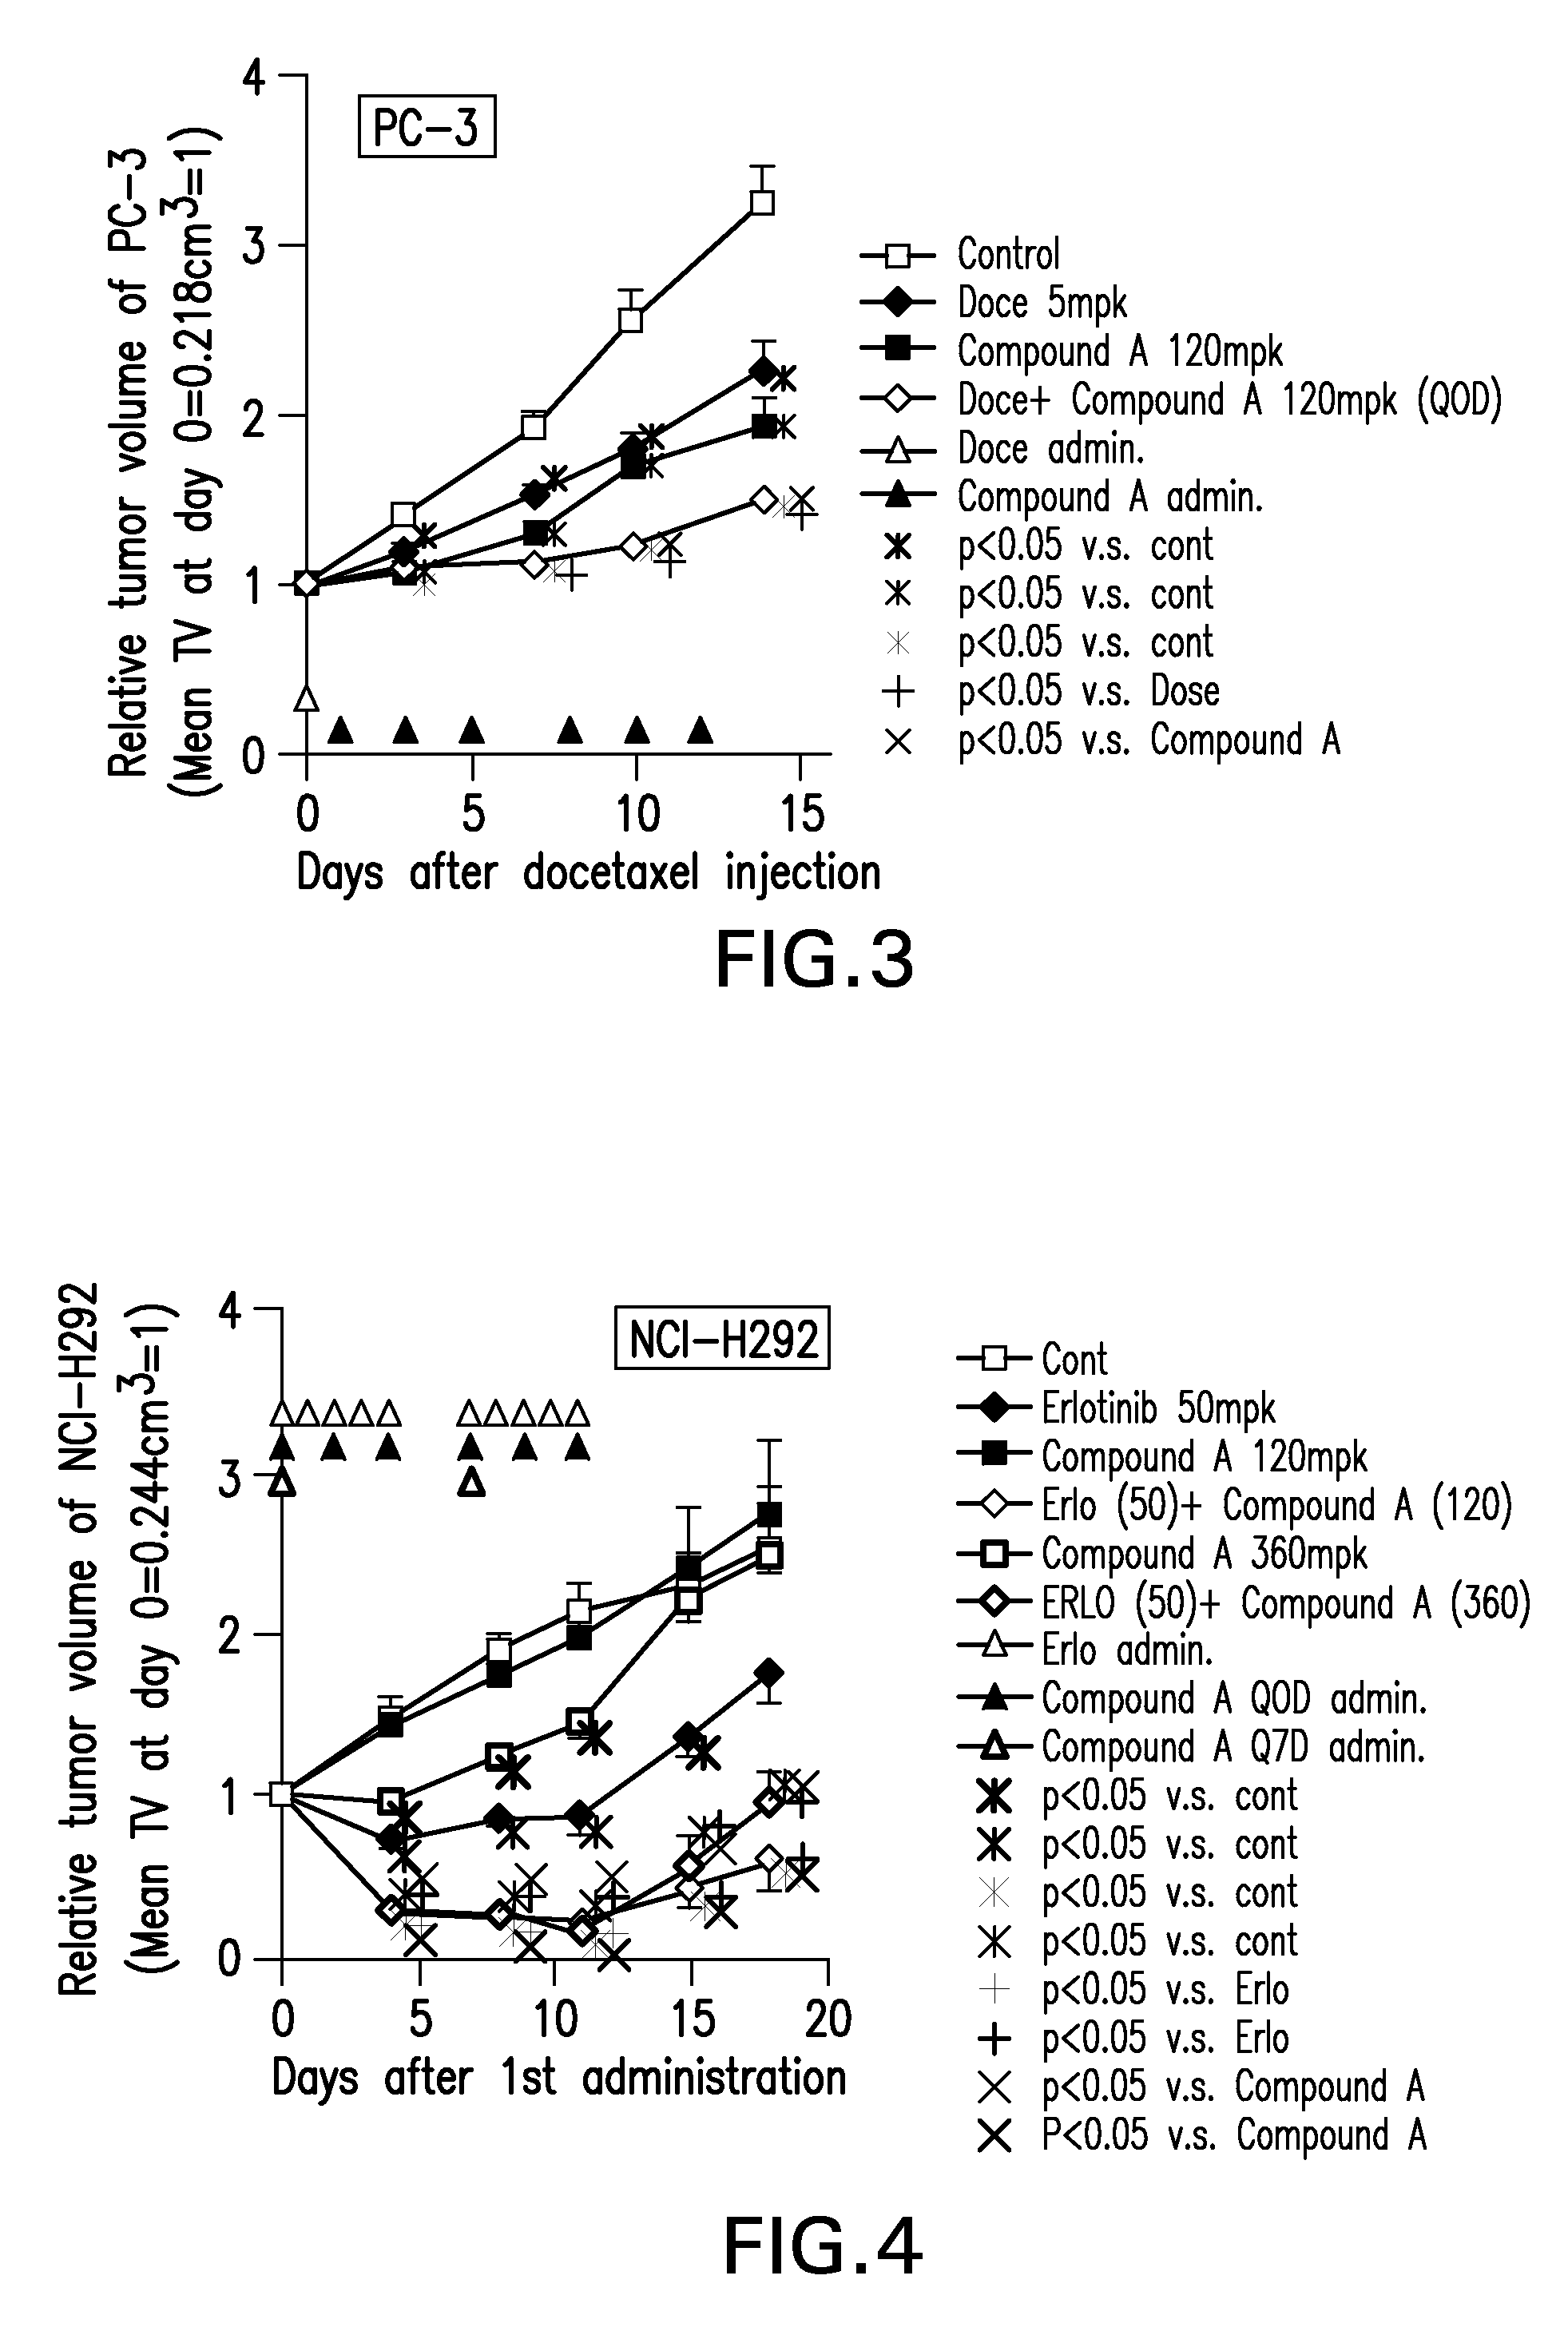 Combination cancer therapy with an AKT inhibitor and other anticancer agents